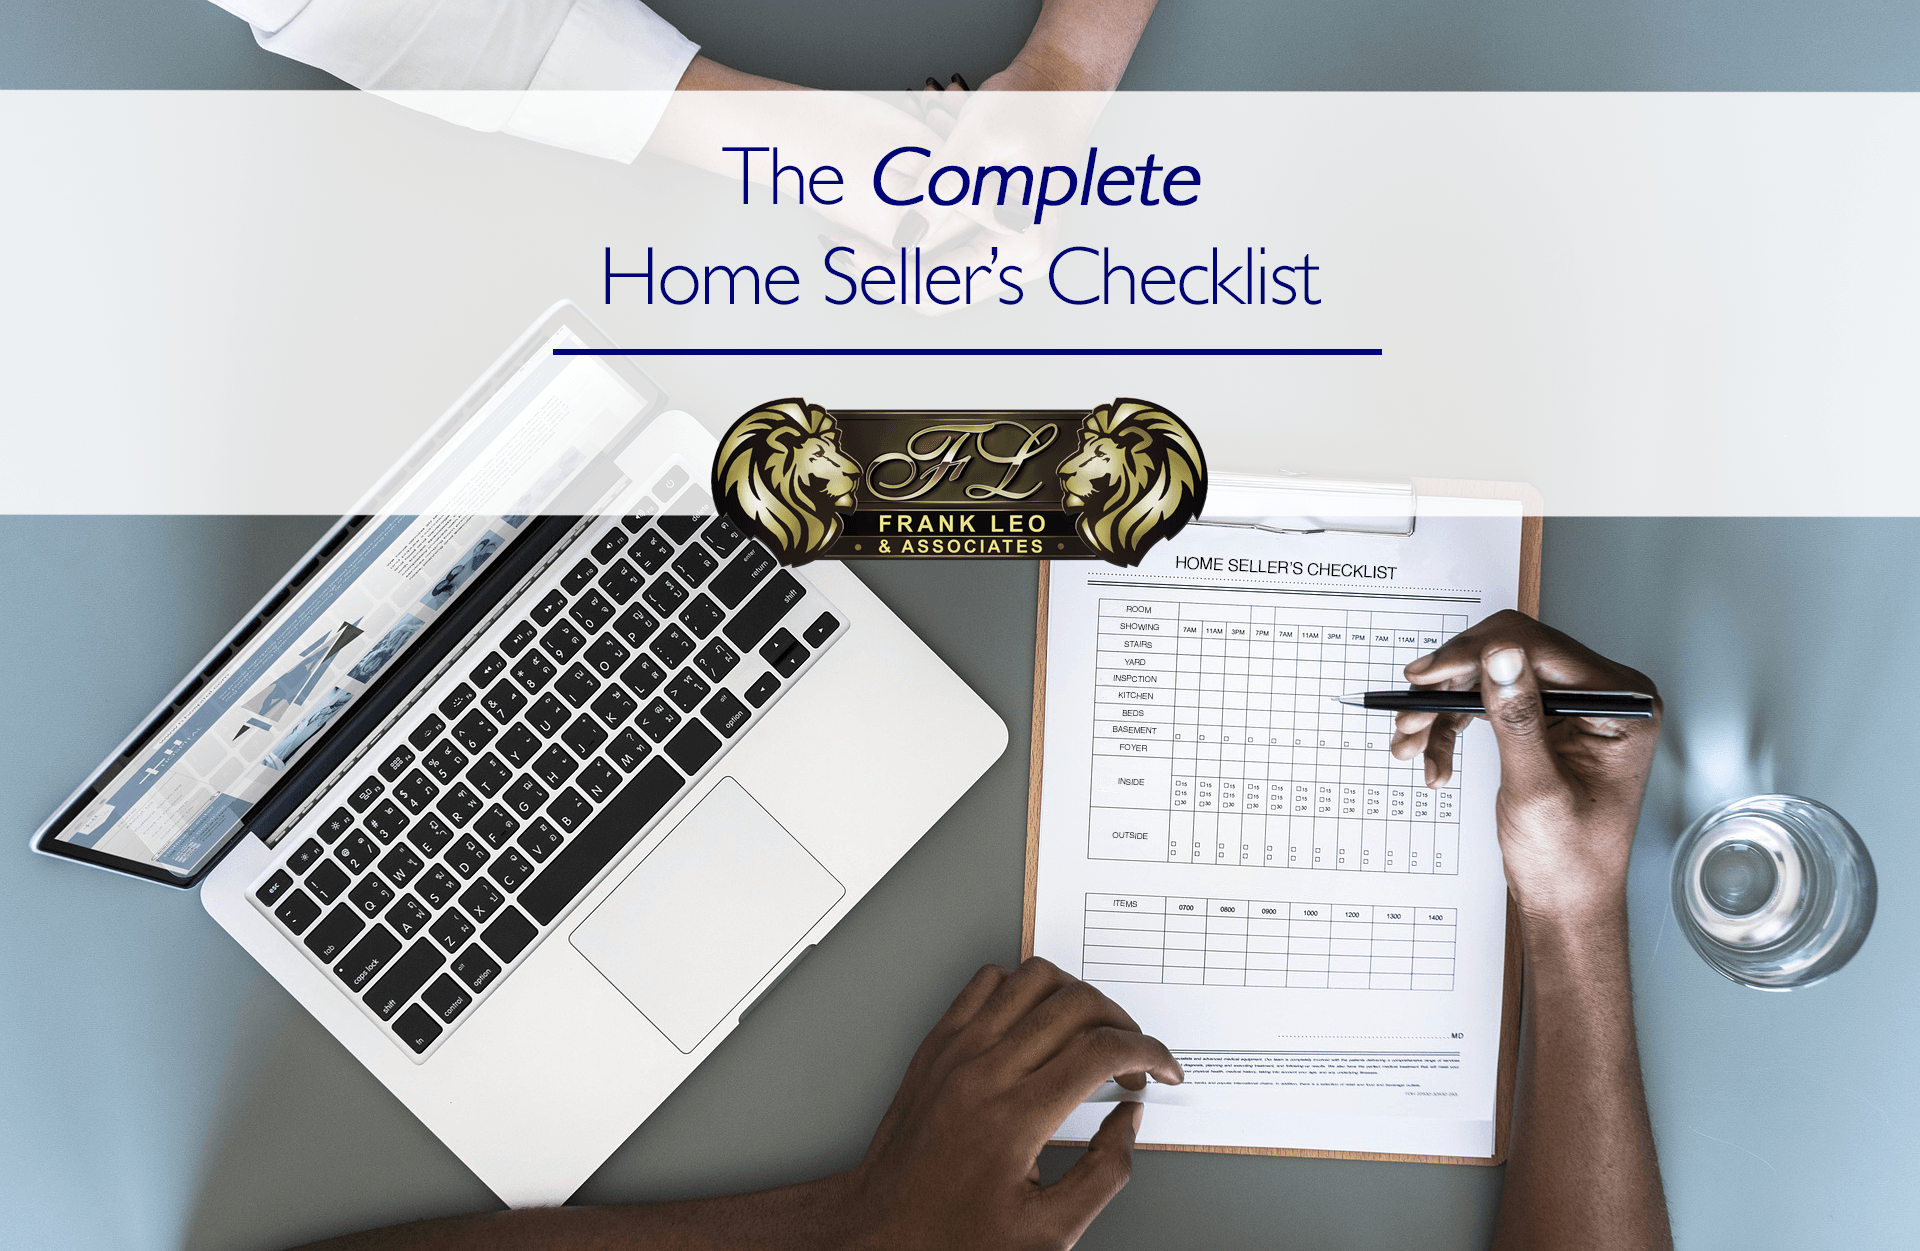 An_image_of_someone_filling_out_a_home_seller's_checklist_with_a_text_Overlay_reading_The_Complete_Home_Seller's_Checklist